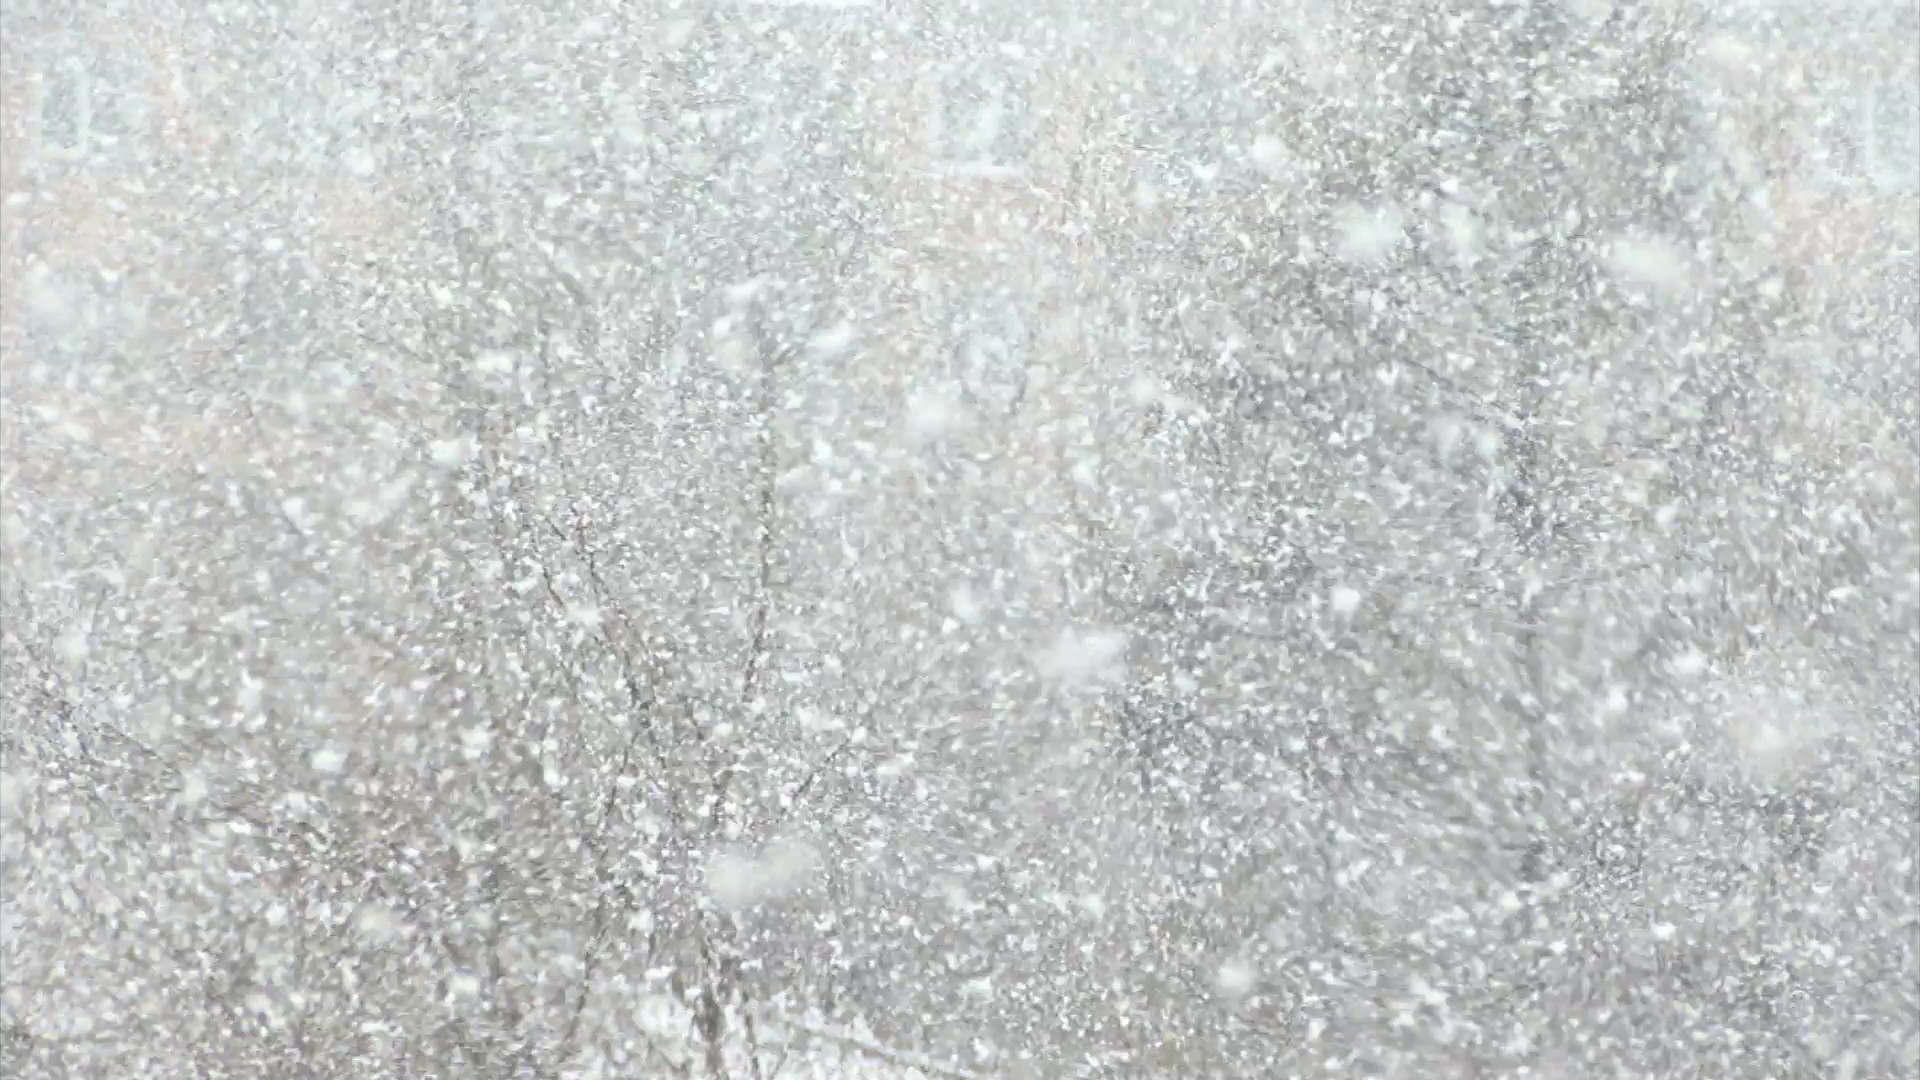 1920x1080 Real Snow Background, large flakes of snow create a winter background